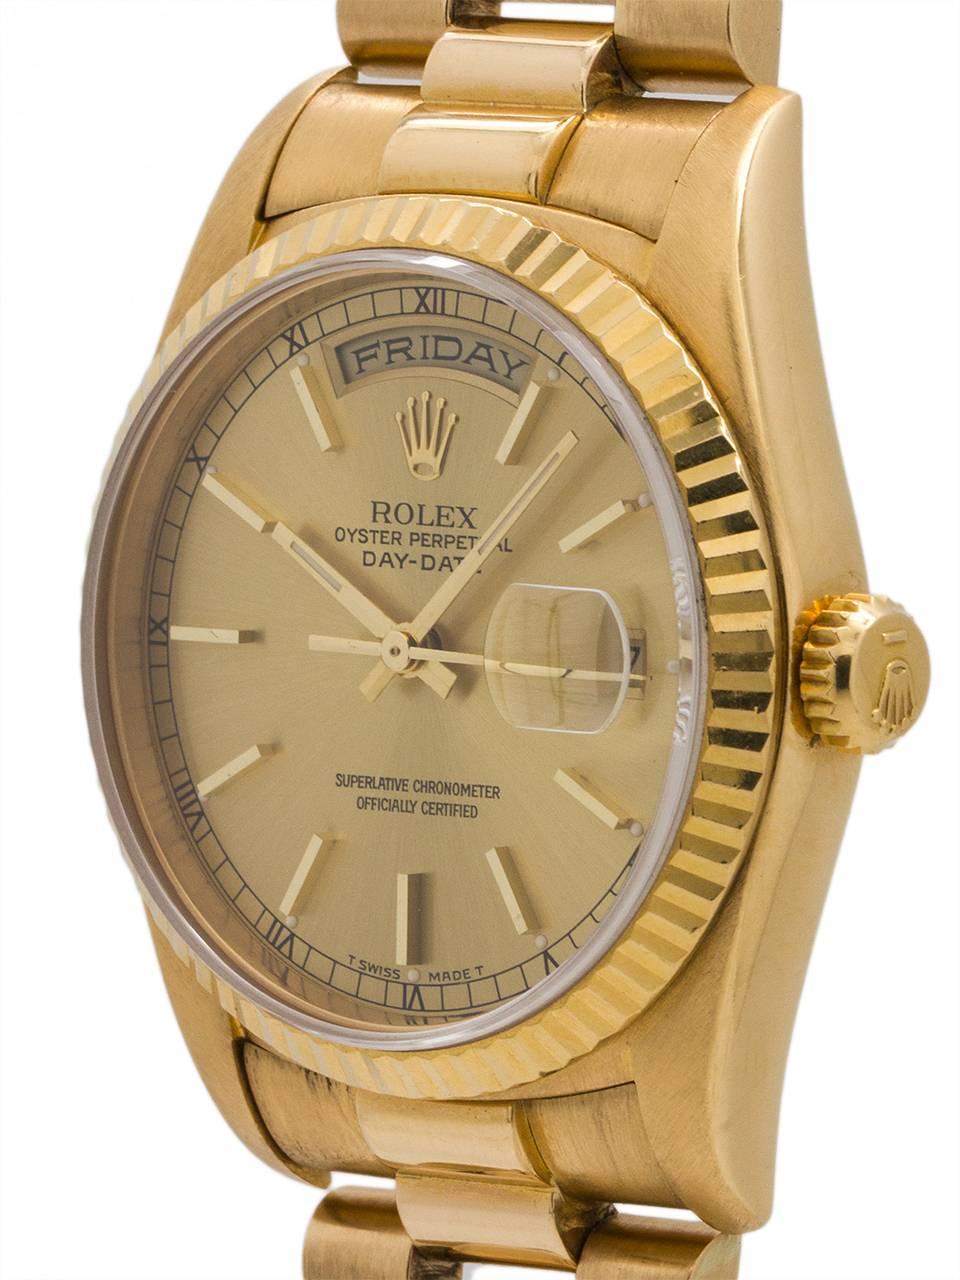 Rolex ref 18238 18K YG Day Date President case serial# S9 circa 1993. Featuring 36mm diameter full size man’s model with sapphire crystal and fluted bezel, and a beautiful original gold champagne dial. Powered by calibre 3155 double quick set